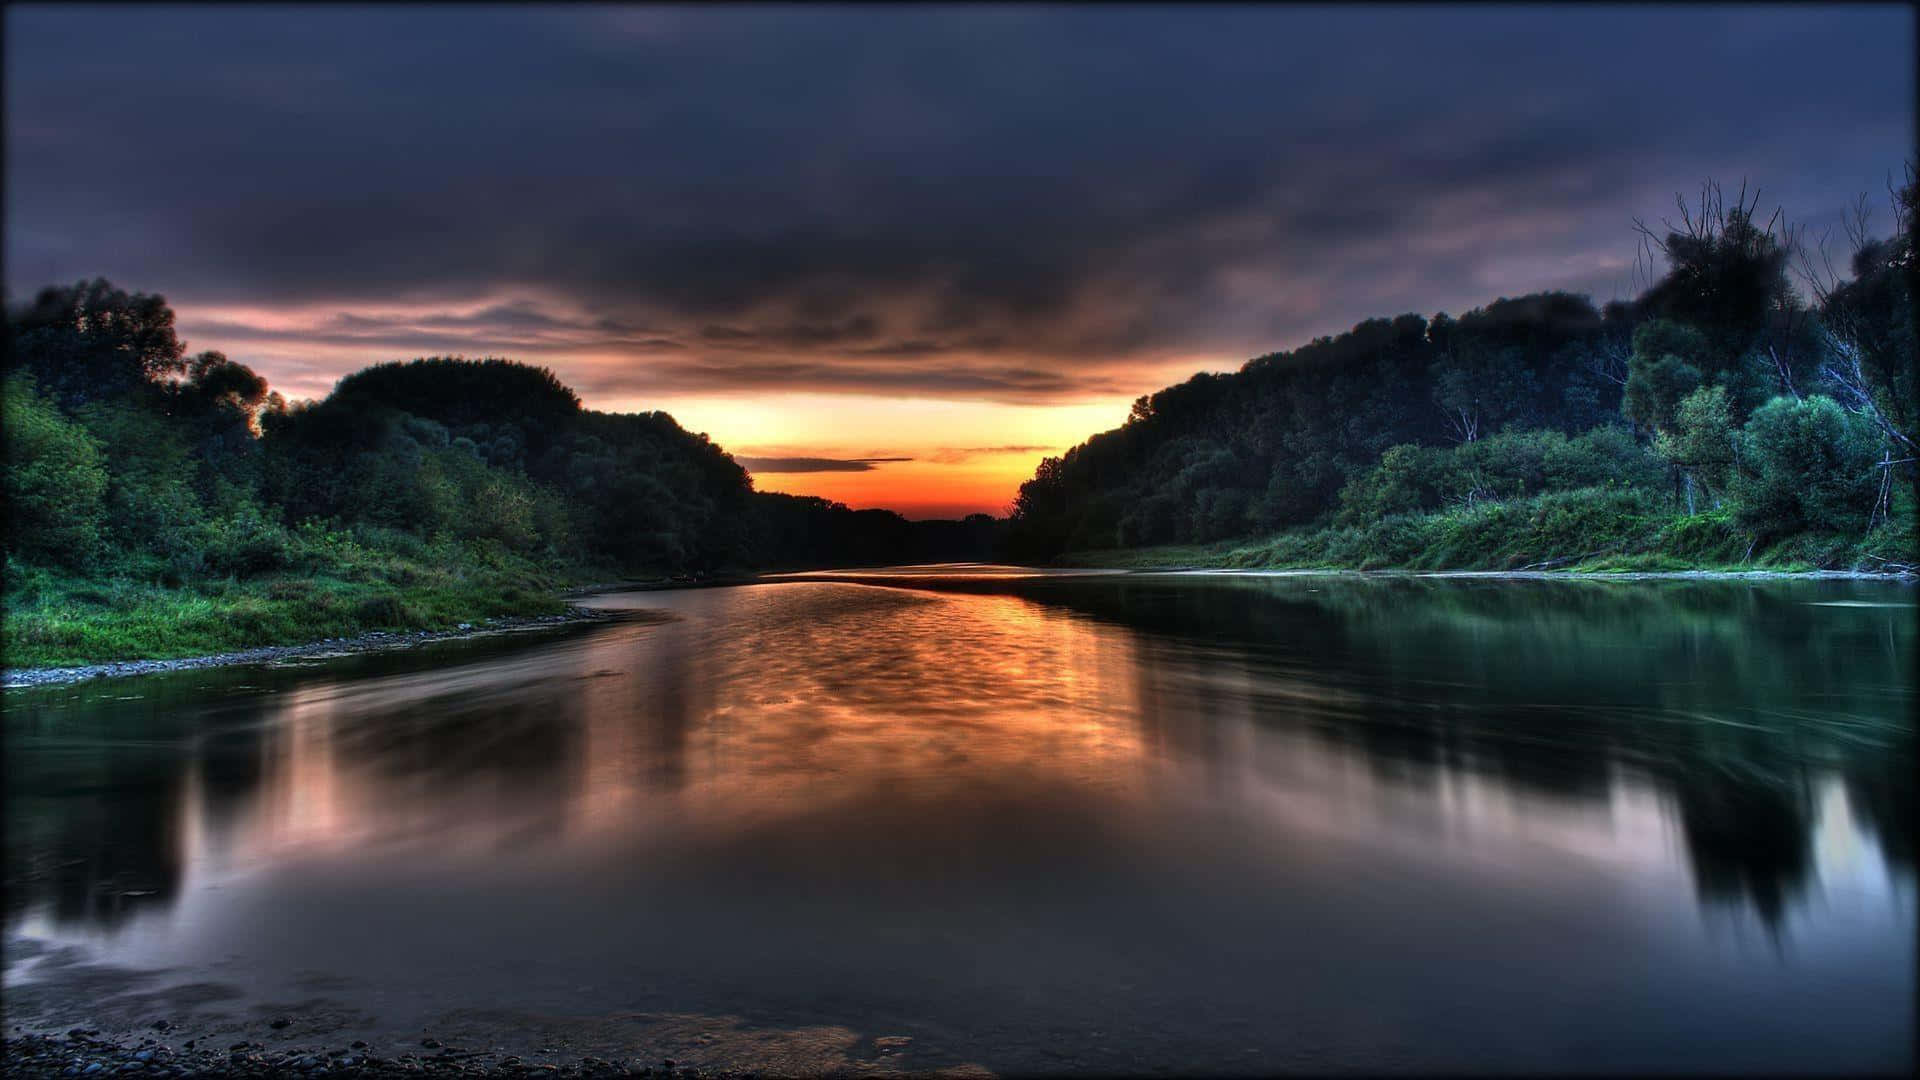 A River With Clouds And Trees At Sunset